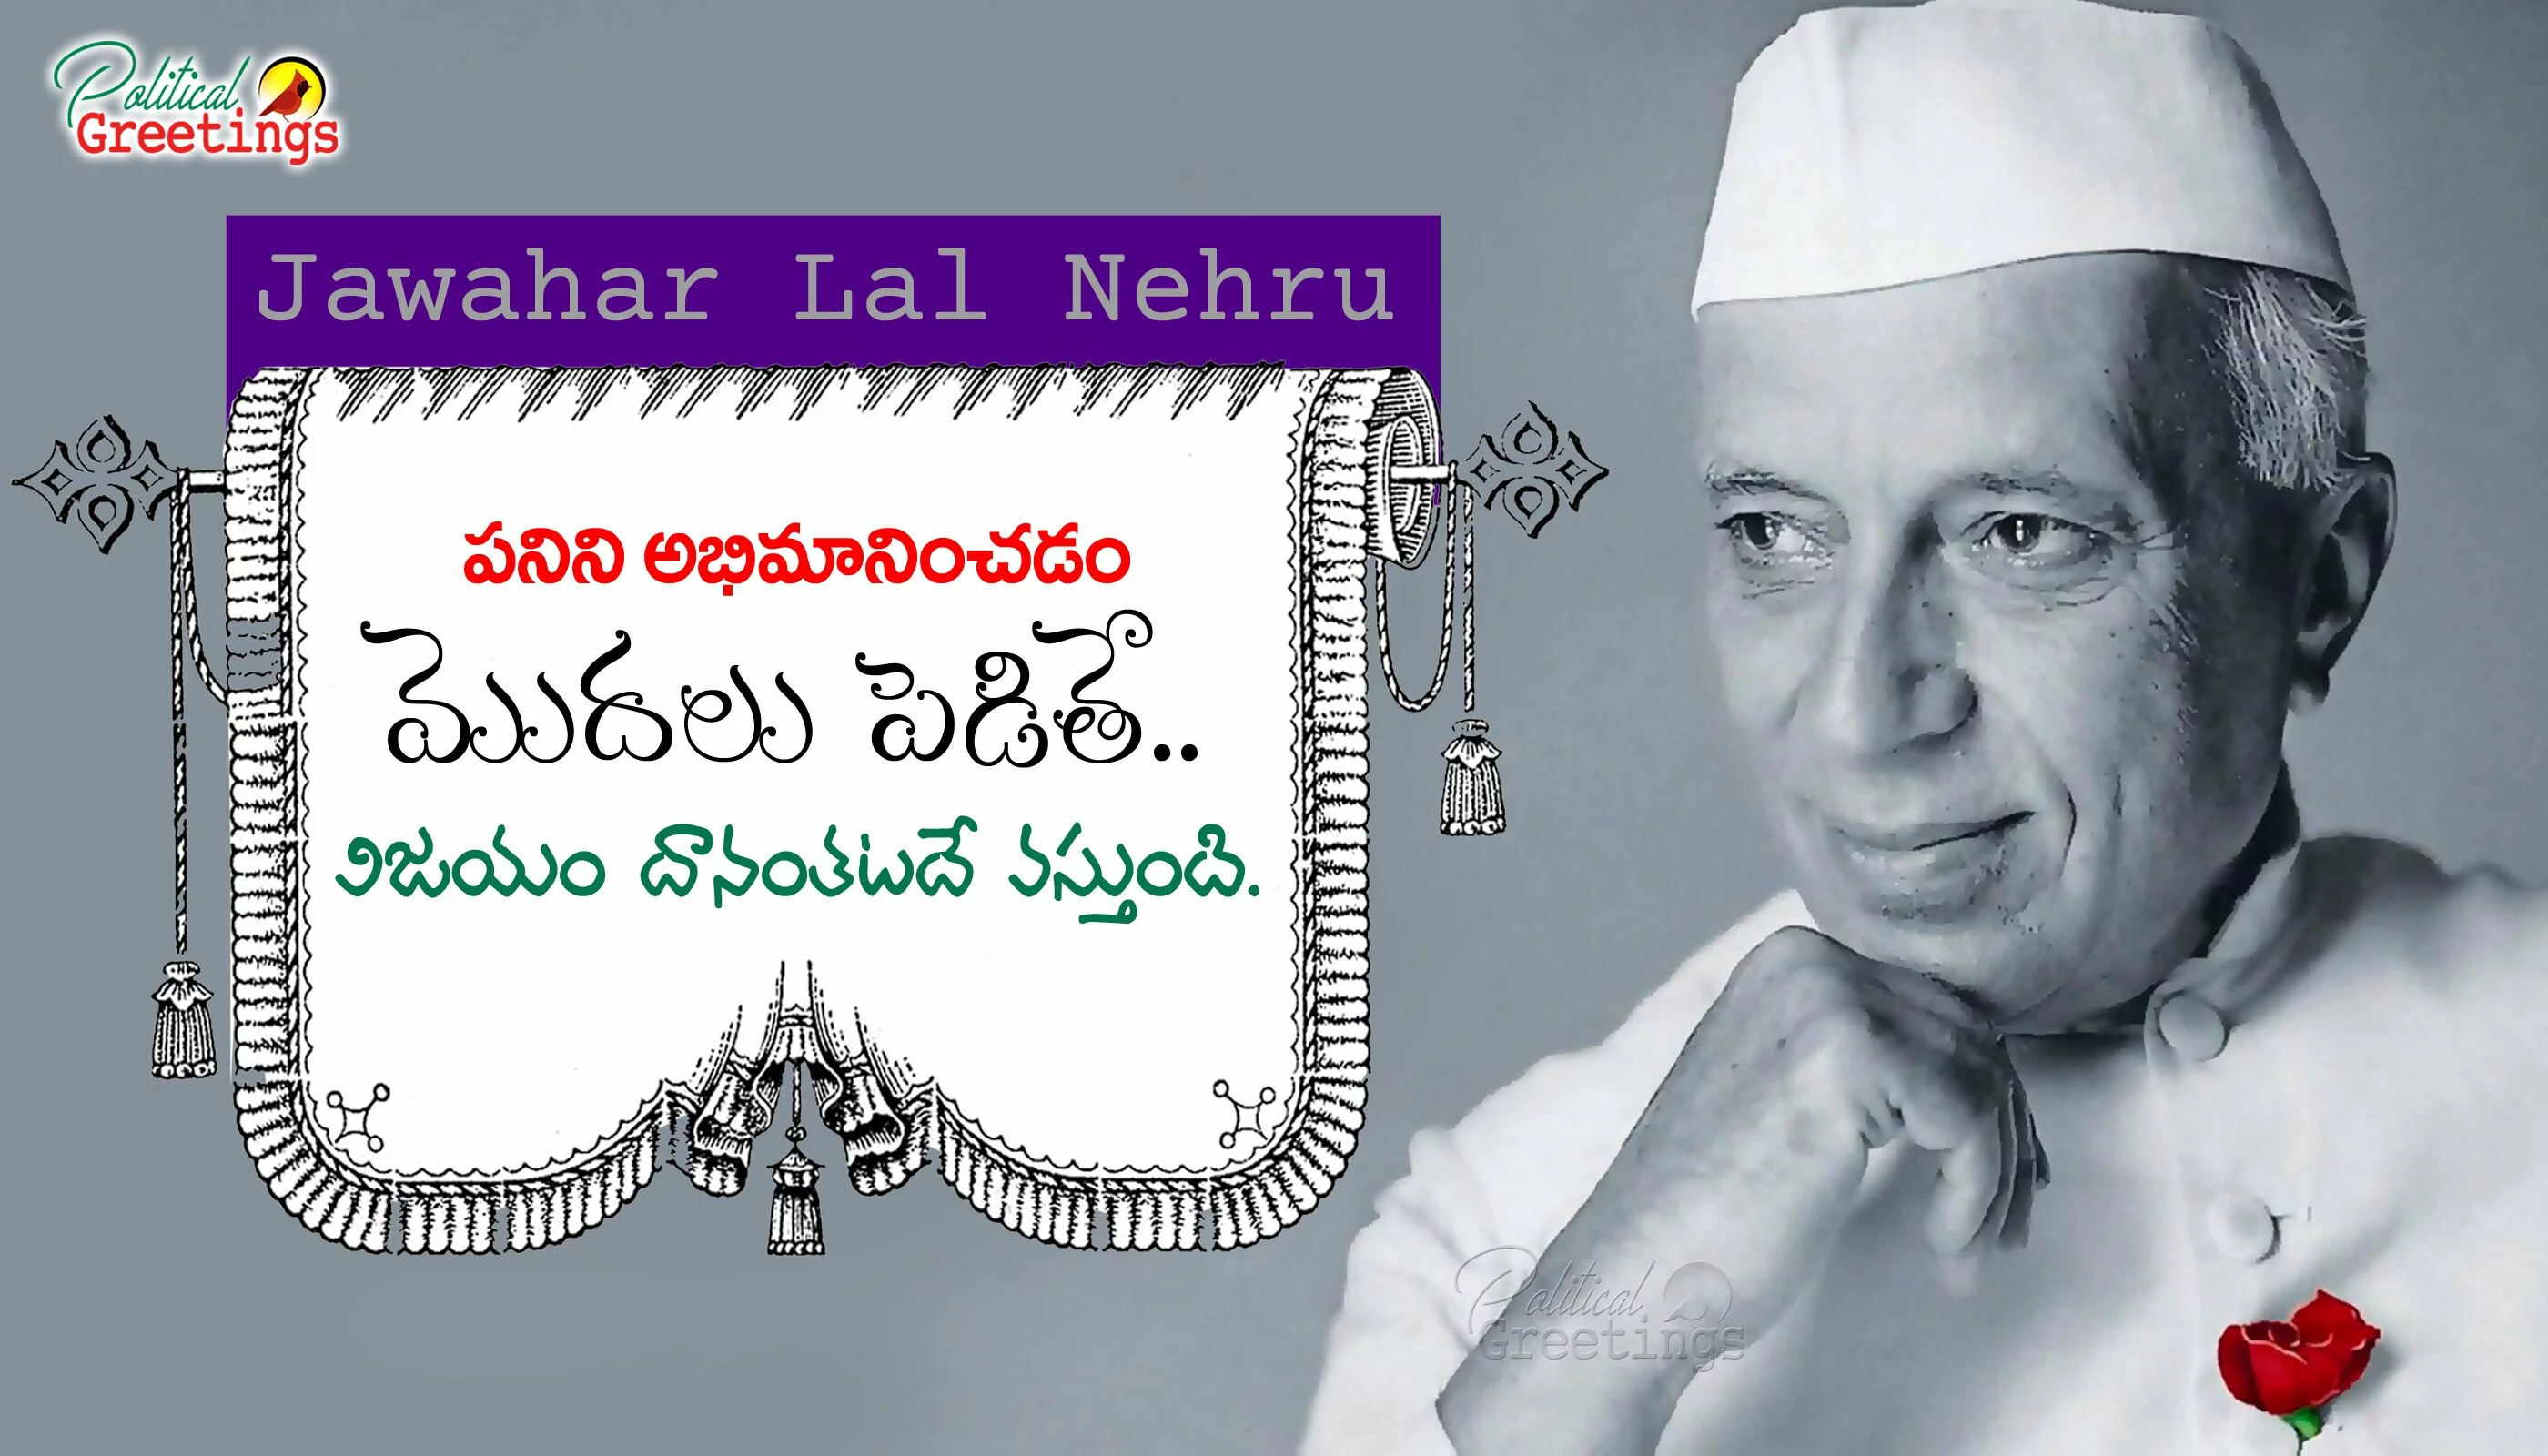 Jawaharlal Nehru Motivational Thoughts and Inspirational Quotes